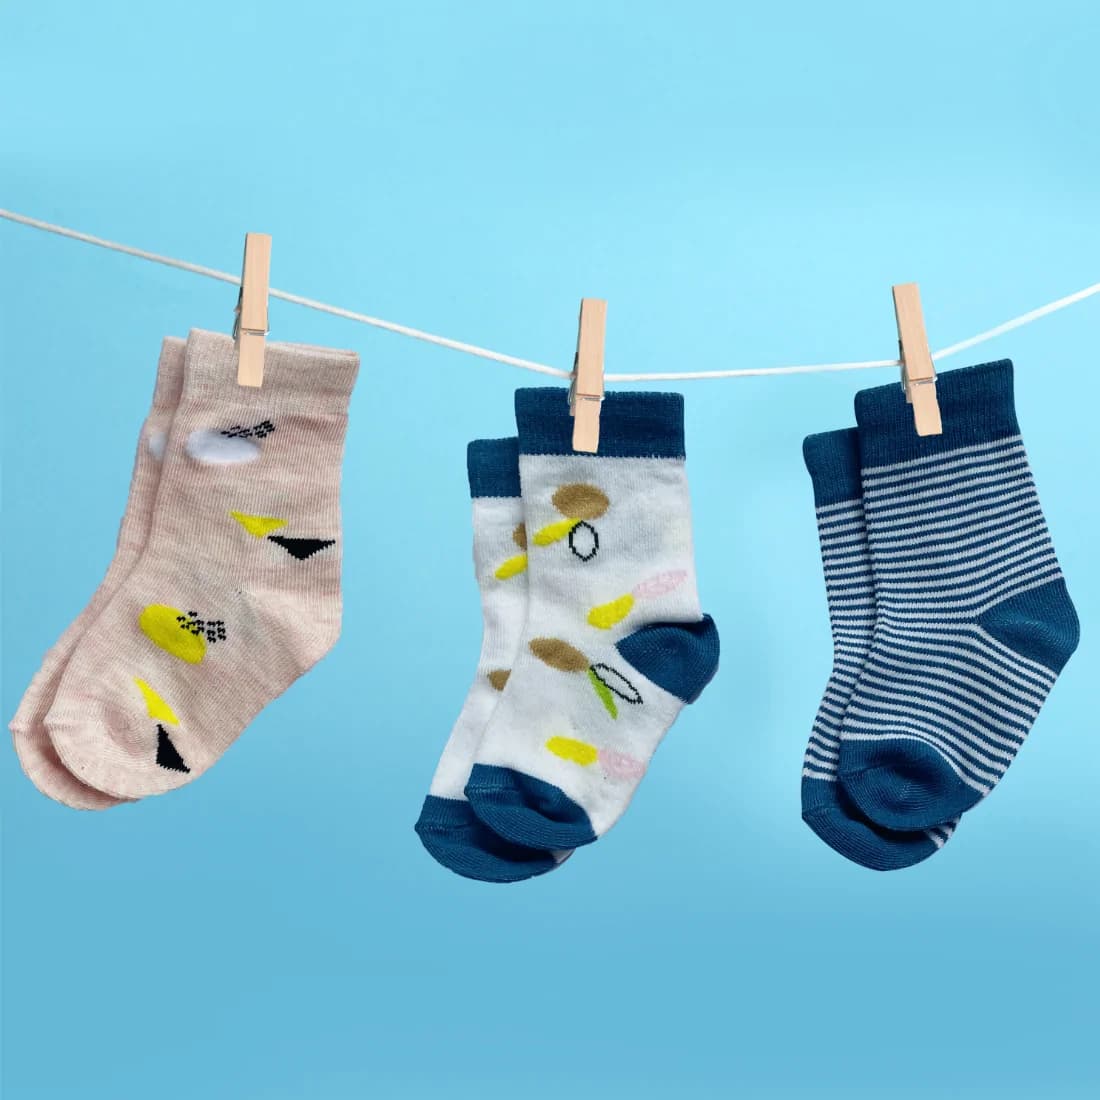 Mylo Antibacterial Baby Socks - Elasticated & Ankle Length - (6-12 Months)  Unisex Blue Striped & Floral